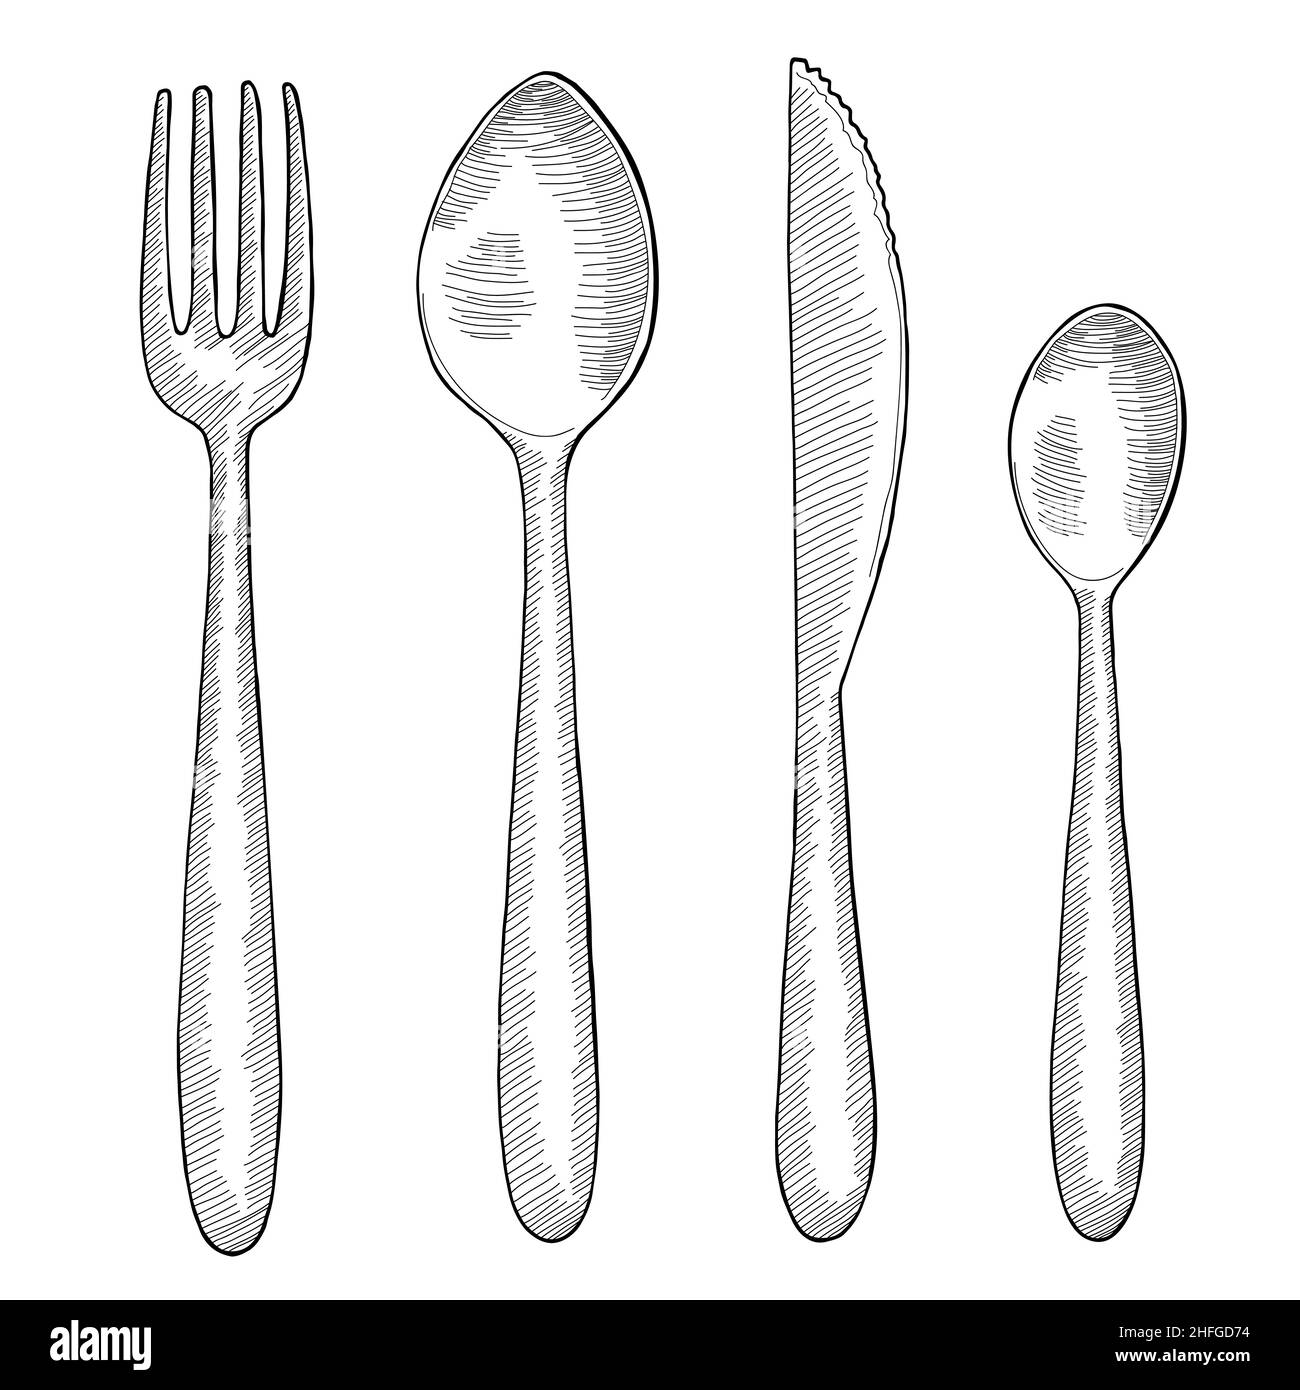 Fork spoon knife set graphic black white isolated sketch illustration vector Stock Vector